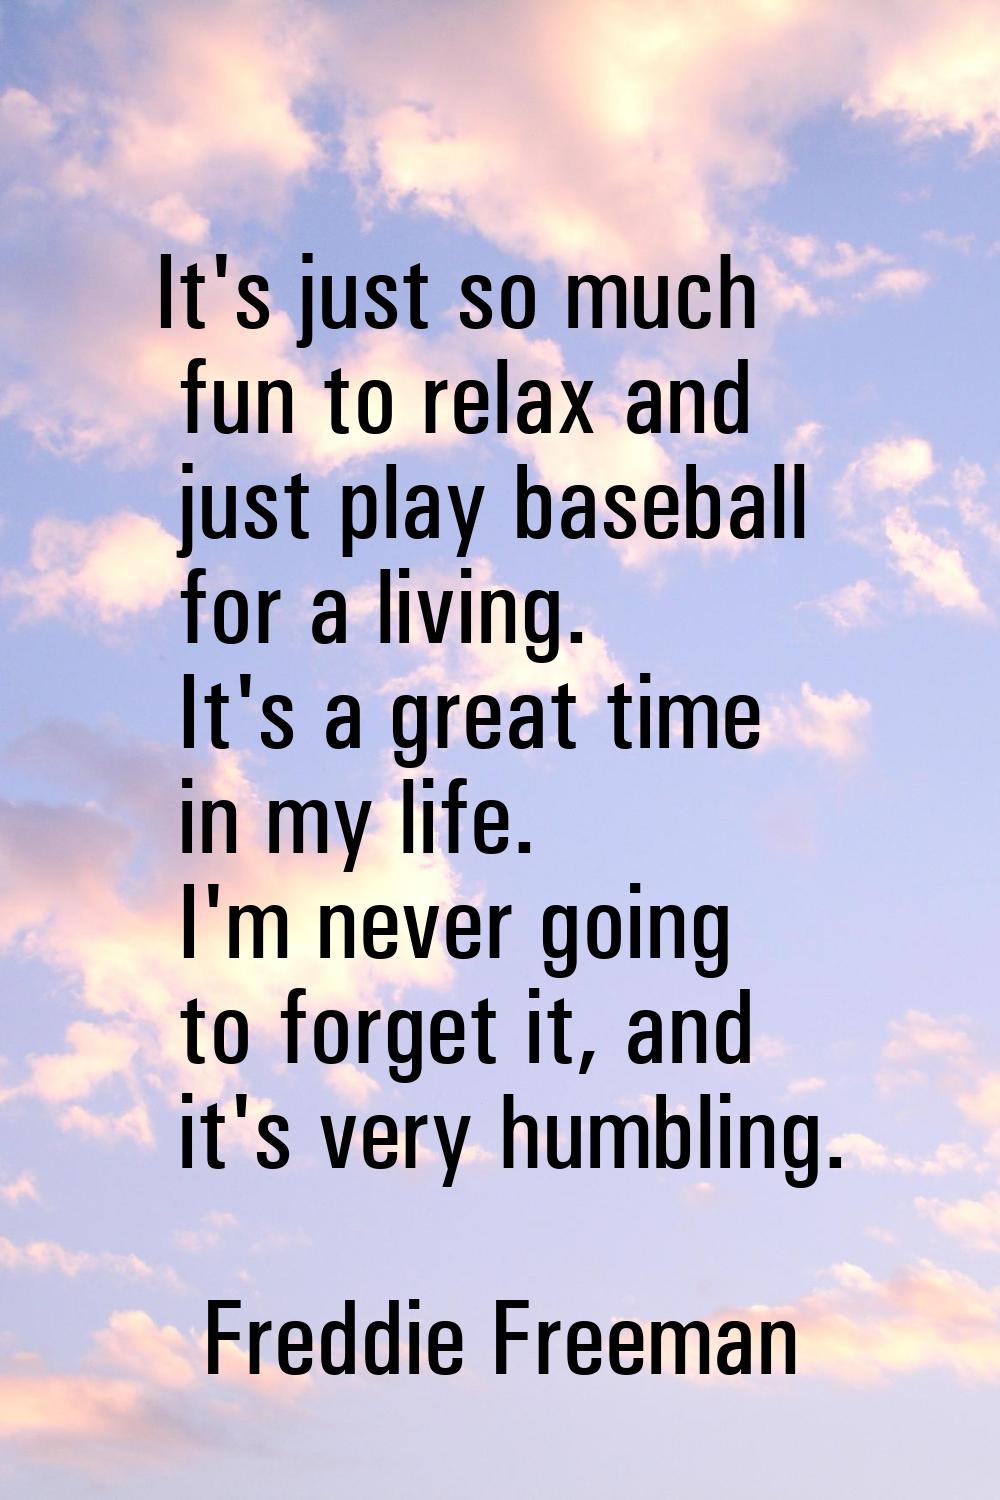 It's just so much fun to relax and just play baseball for a living. It's a great time in my life. I